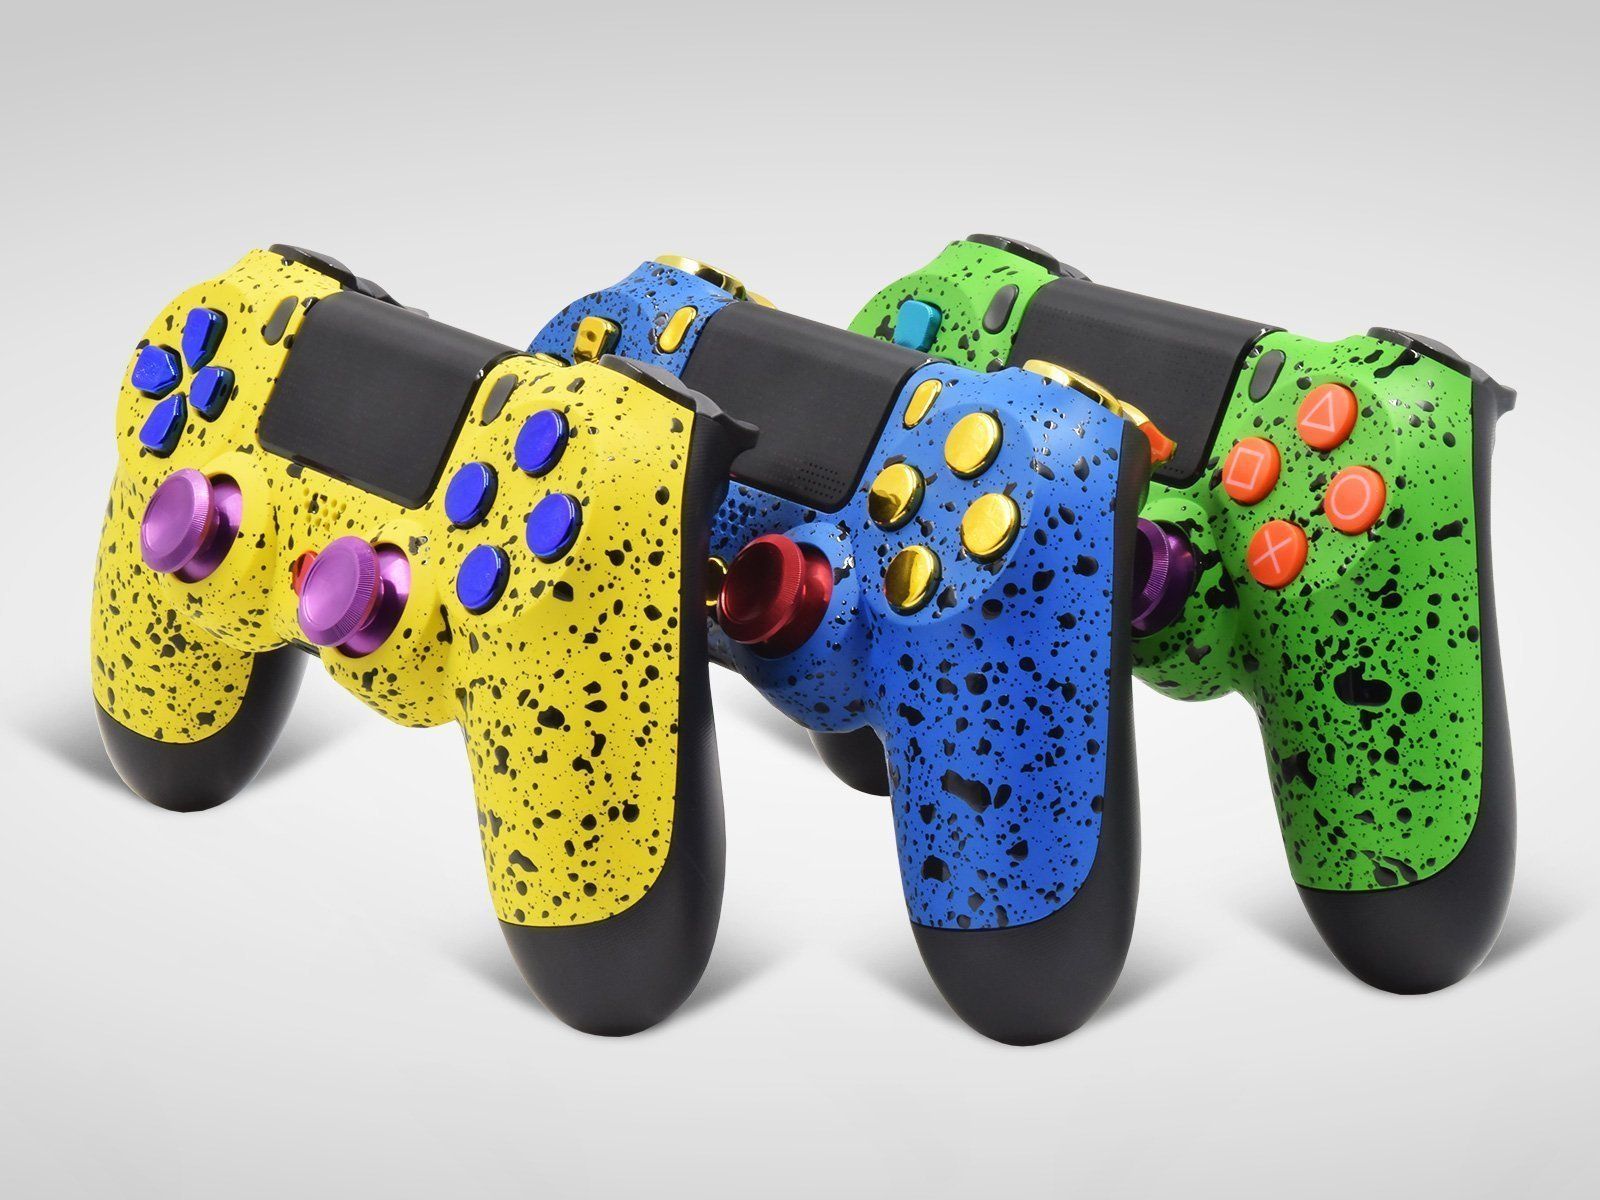 PS4 Custom Controllers Limited Edition Designs, Prices, Picture and More Modz Blog